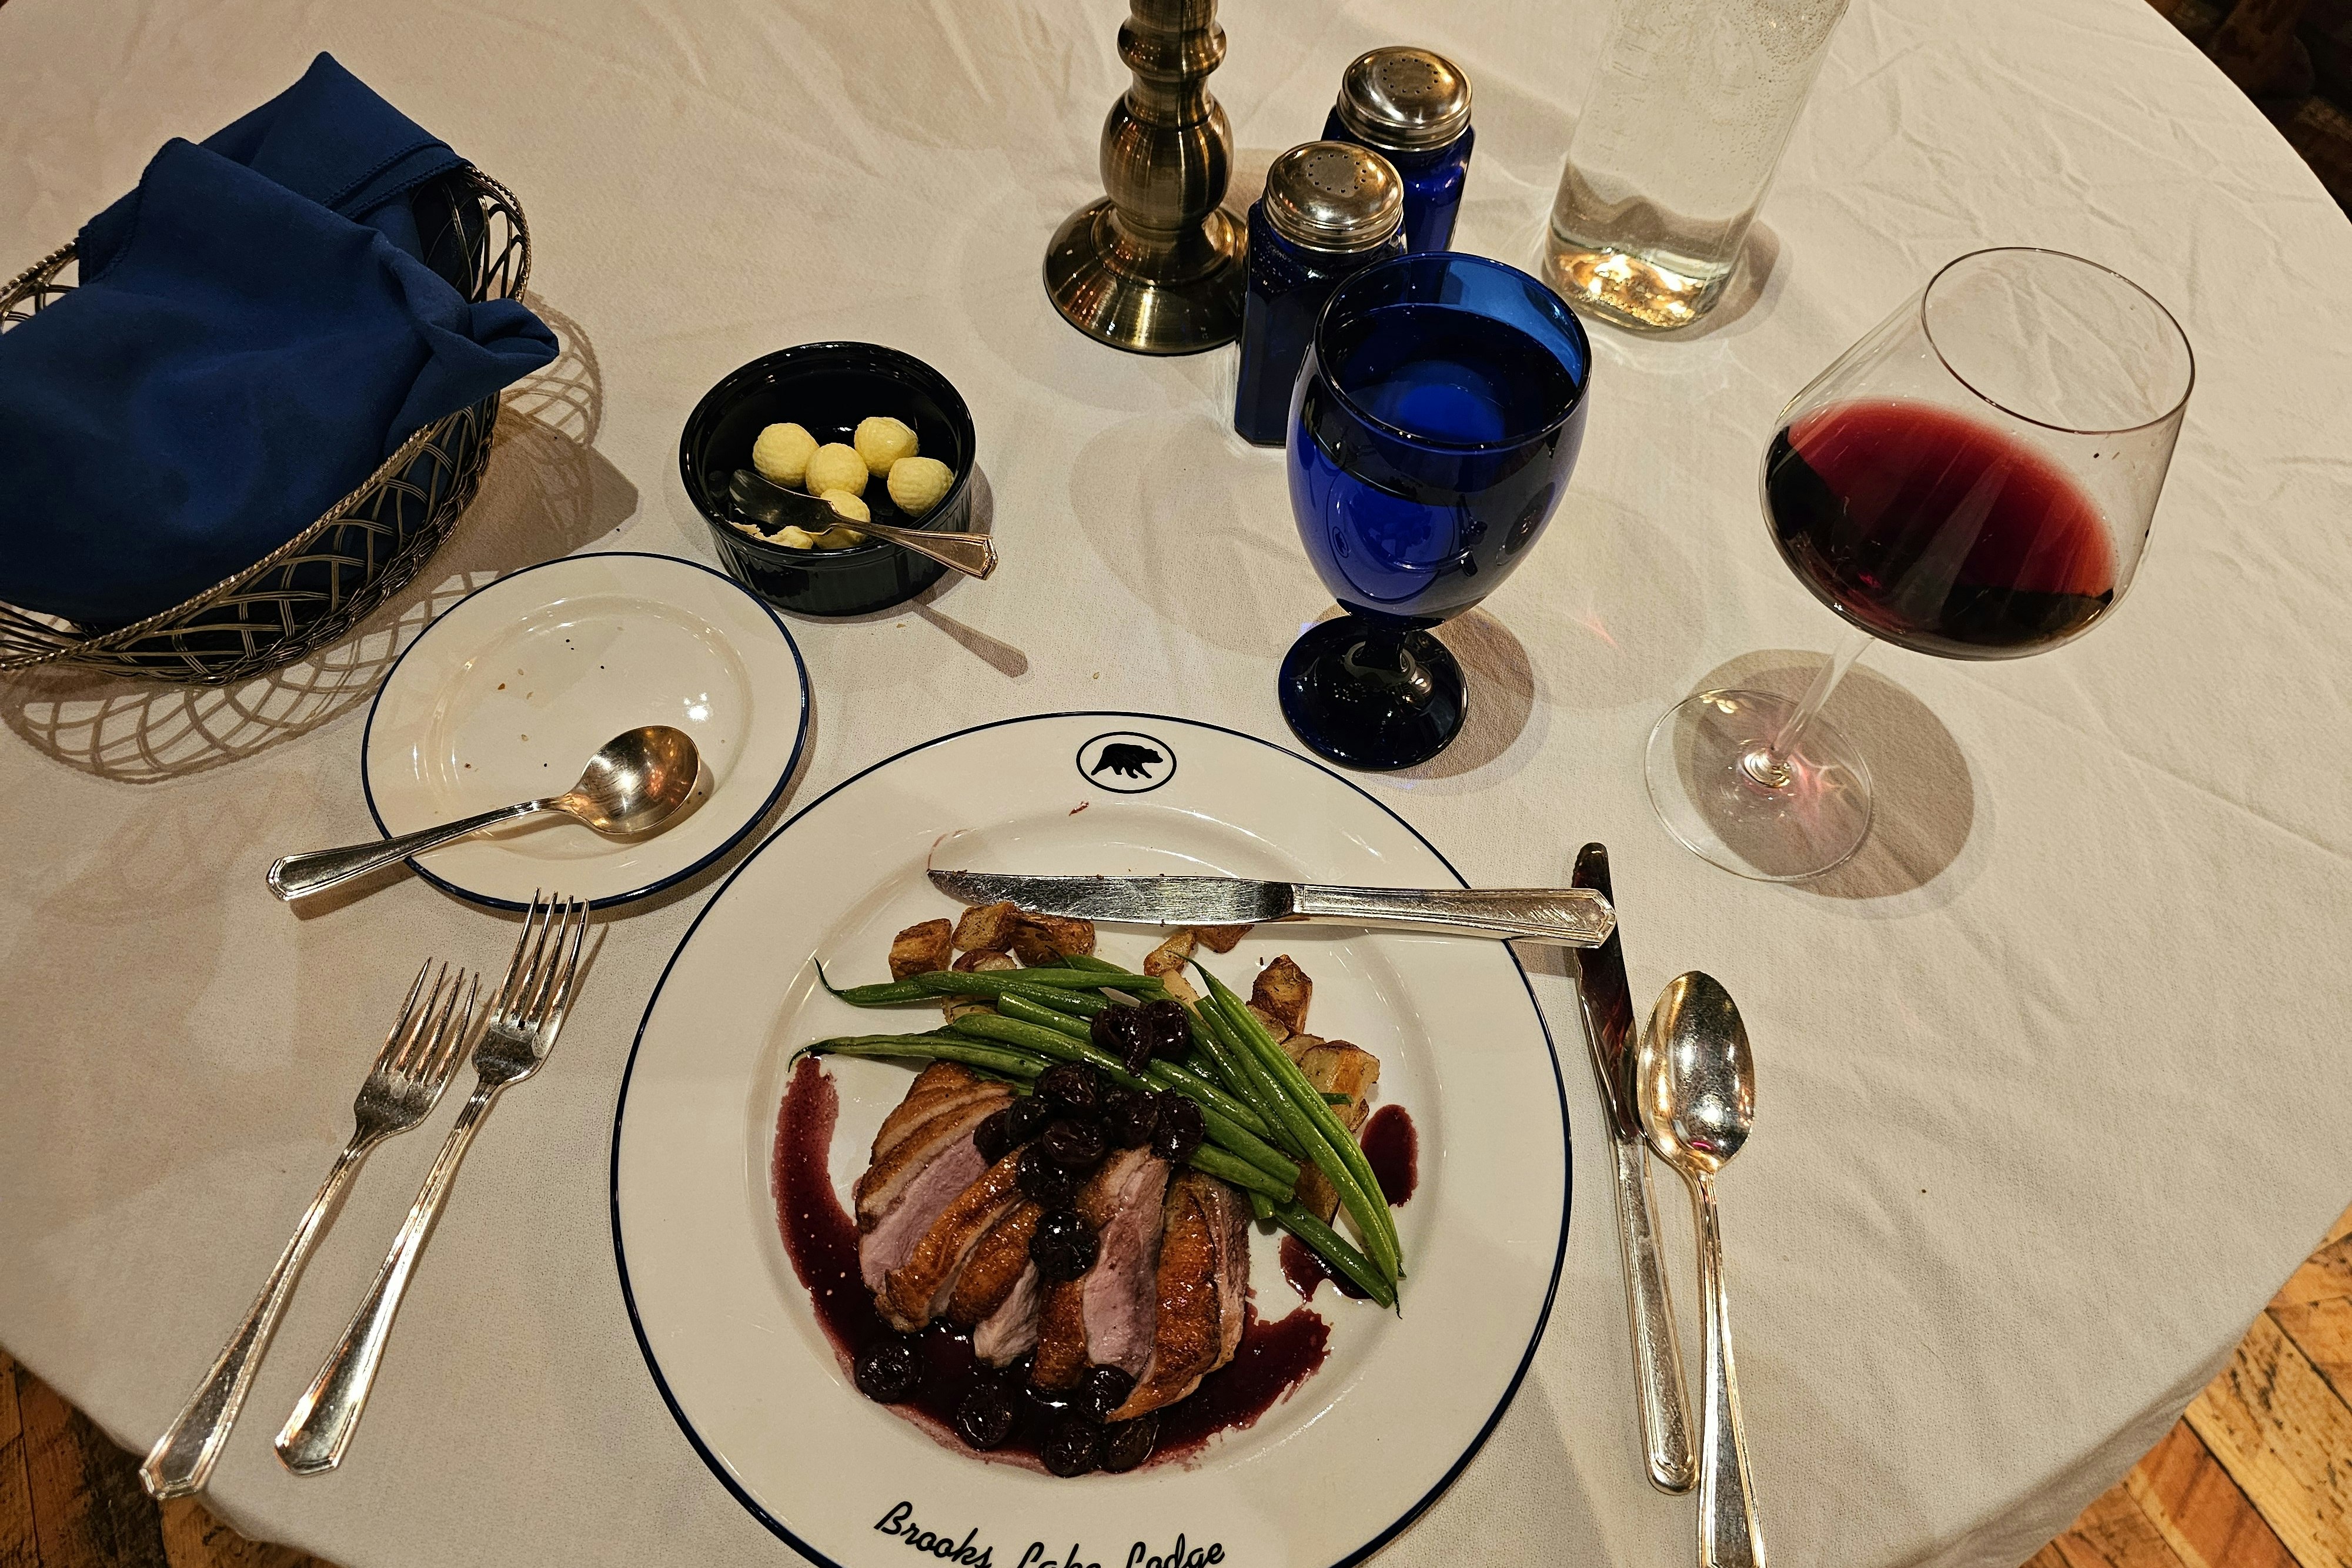 The duck has become chef Whitney Hall's favorite dish to make for Brooks Lake Lodge guests. It is absolutely delicious.